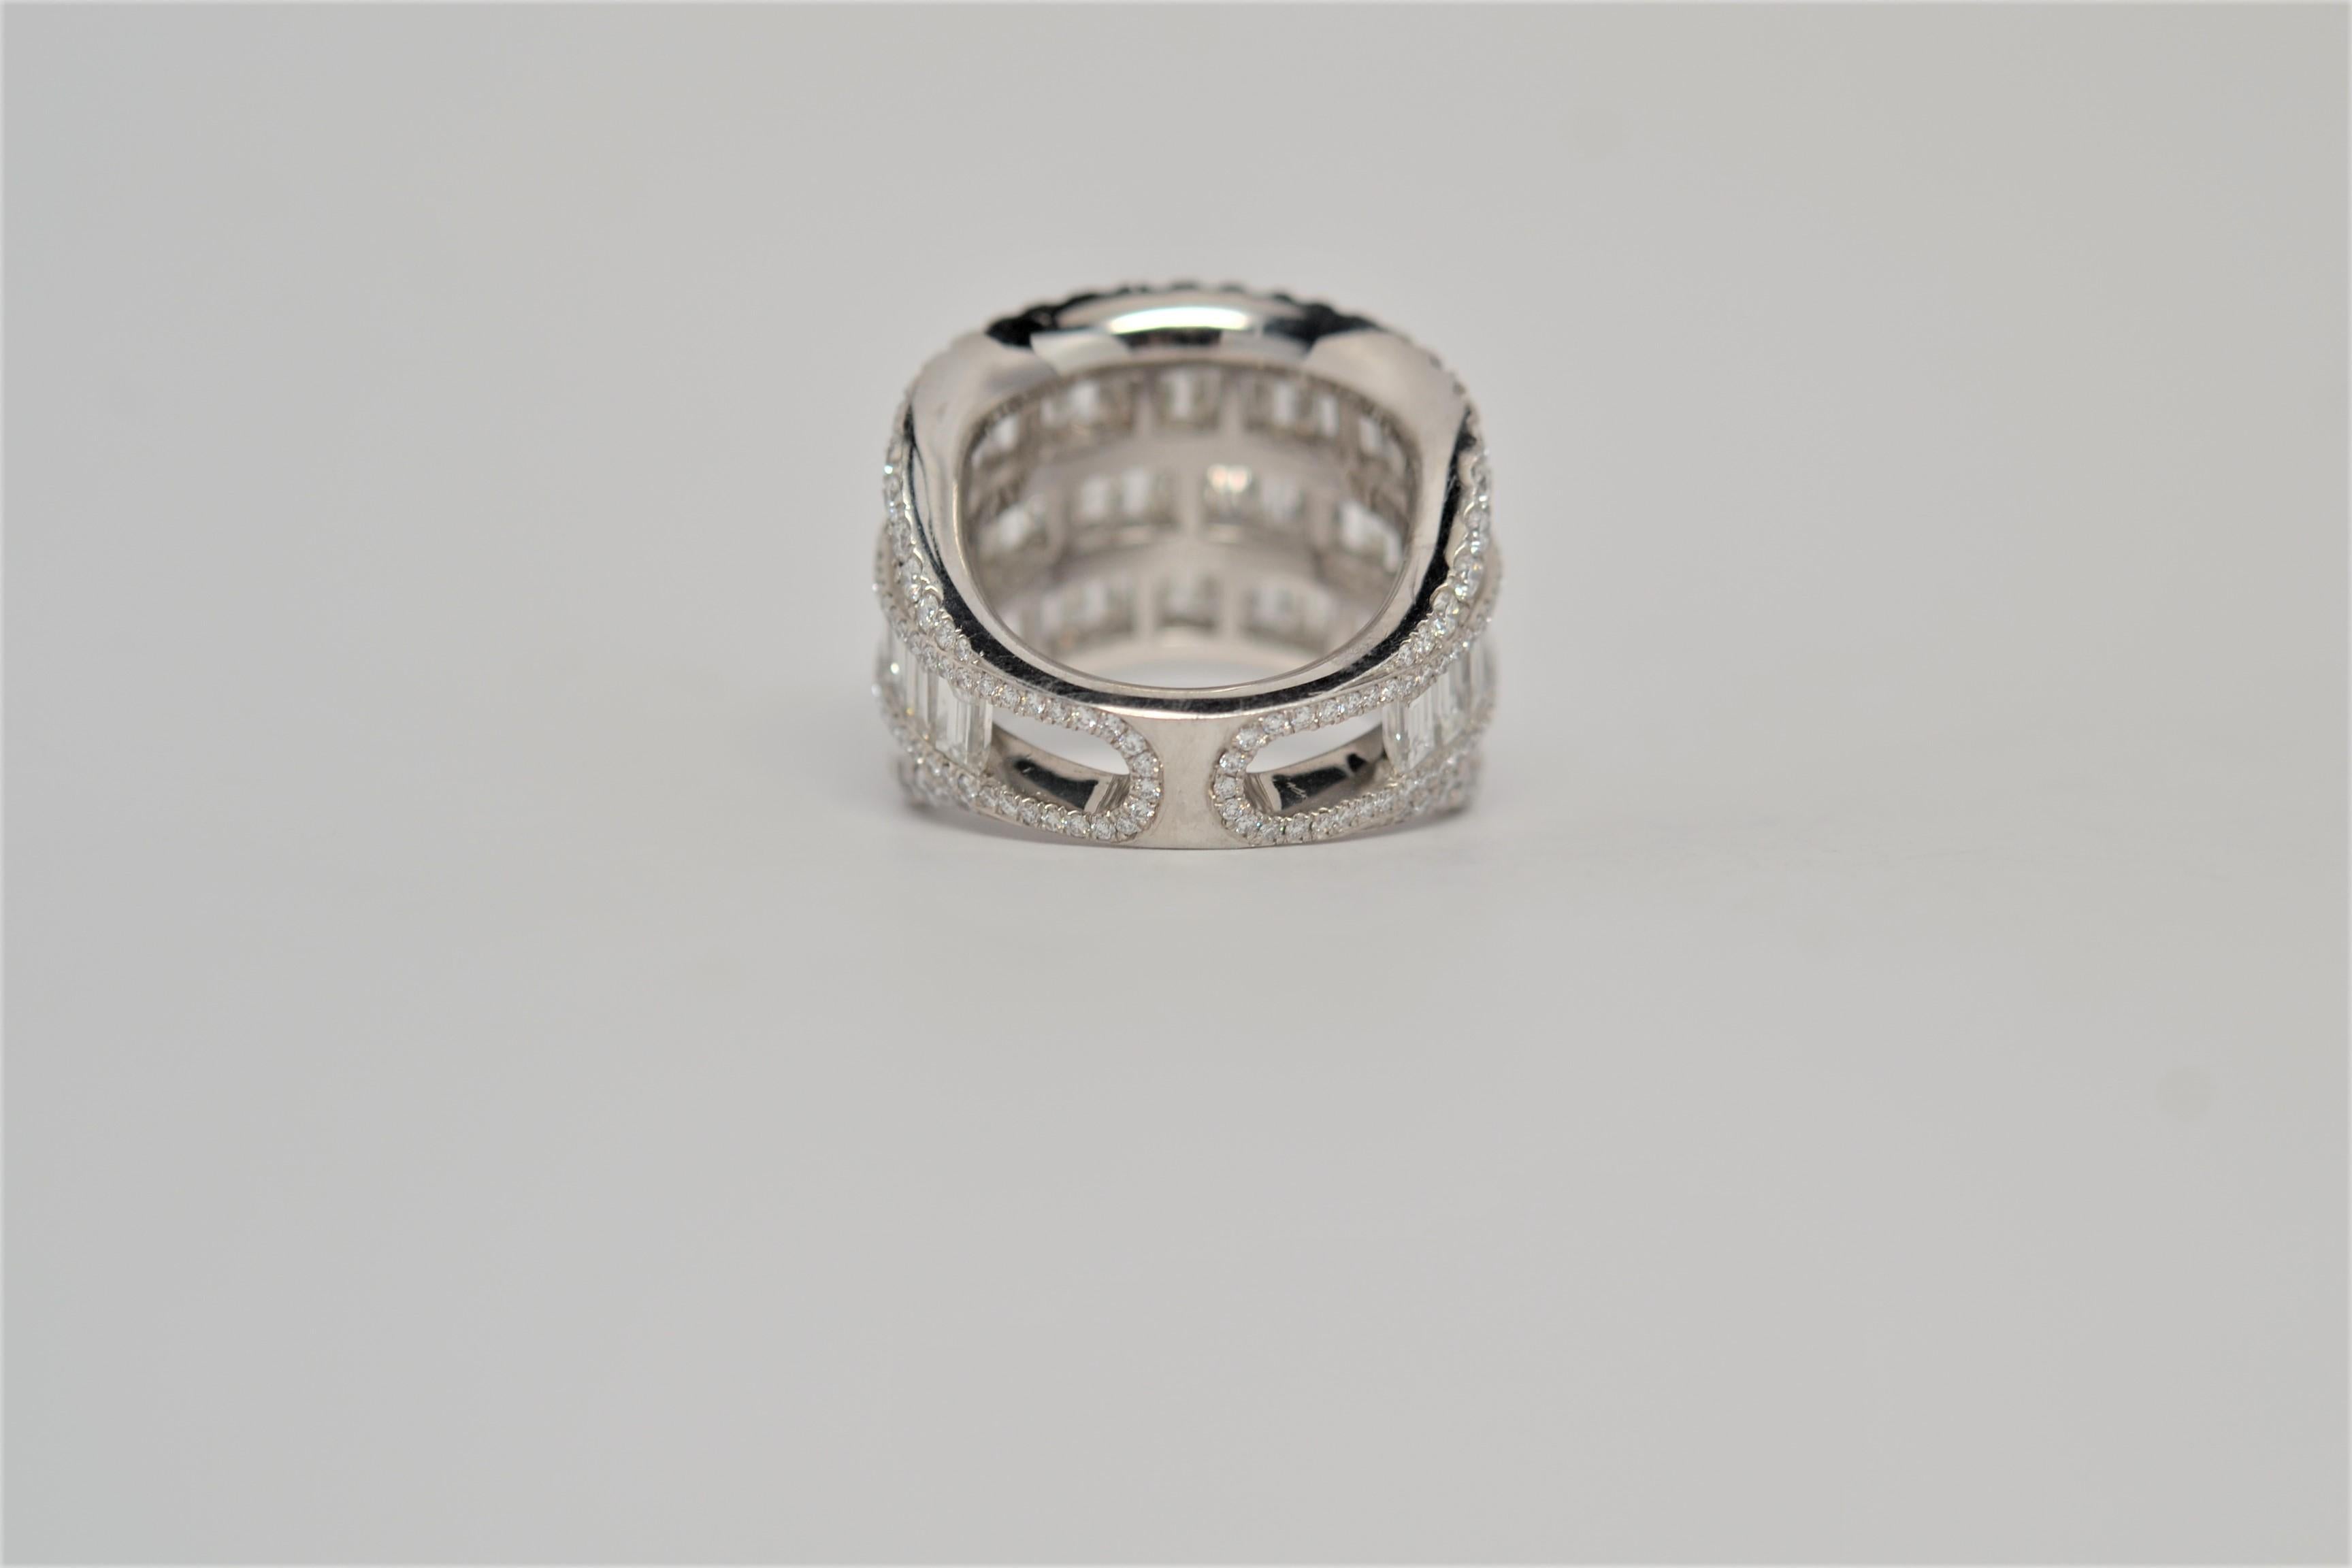 A finely made ladies' Platinum and Diamond wedding band set in an eternity format with both Round Brilliant and Baguette Cut Diamonds. A seven row layout is set with alternating diamond cuts and tapers to a single row. Two hundred and eight Round